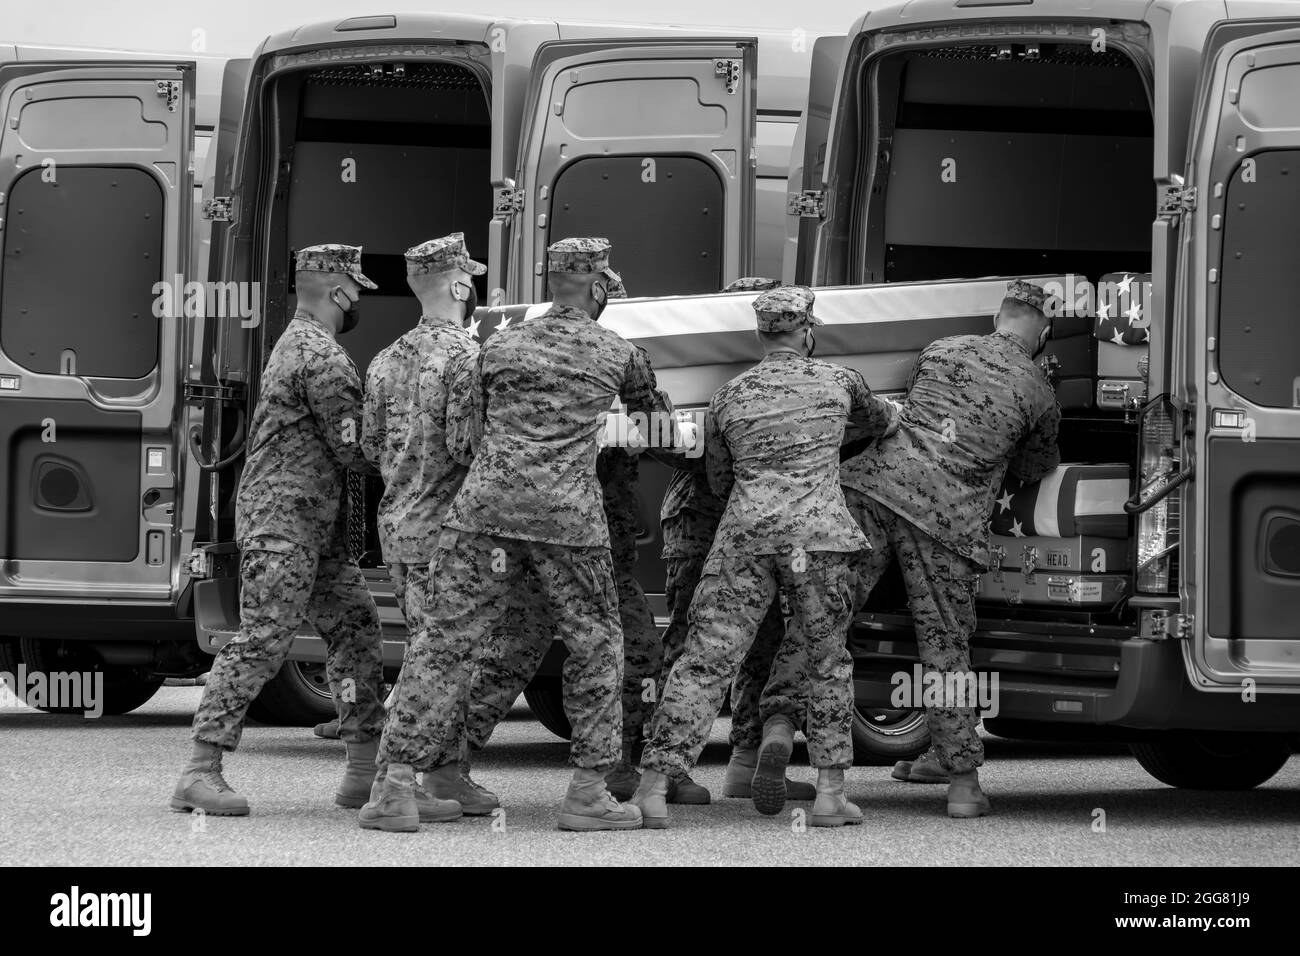 A U.S. Marine Corps carry team transfers the remains of Marine Corps Cpl. Humberto A. Sanchez of Logansport, Indiana, Aug. 29, 2021 at Dover Air Force Base, Delaware. Sanchez was assigned to 2nd Battalion, 1st Marine Regiment, 1st Marine Division, I Marine Expeditionary Force, Camp Pendleton, California. (U.S. Air Force photo by Jason Minto) Stock Photo